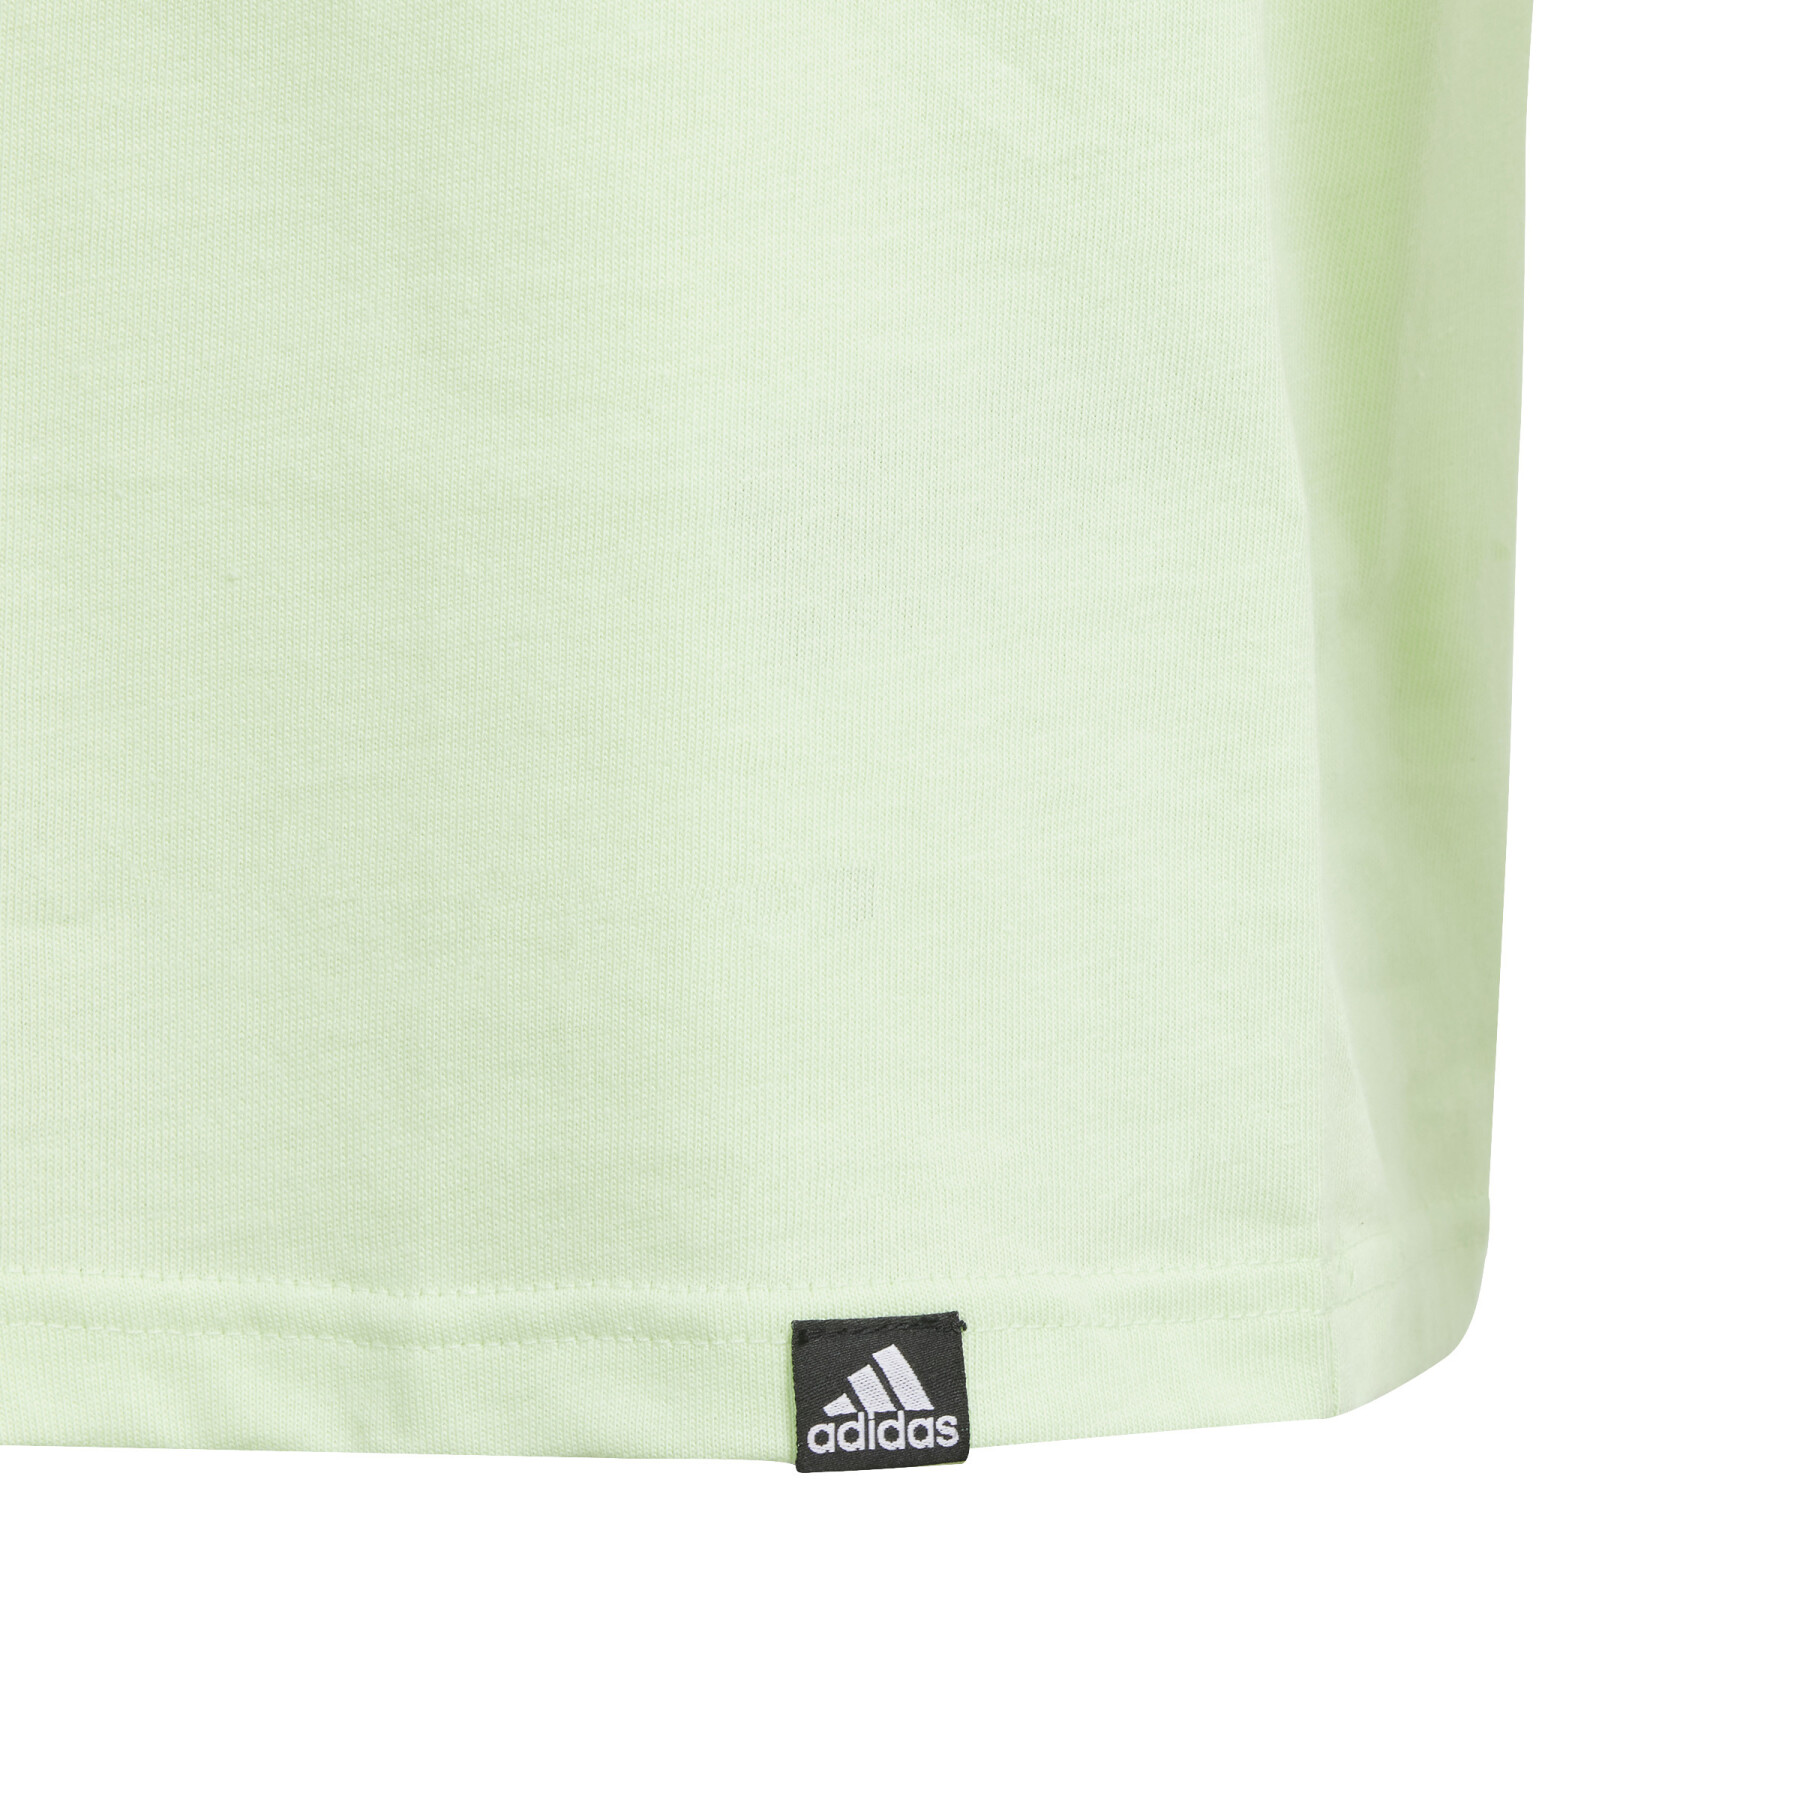 Kinder T-Shirt adidas Table Illustrated Graphic